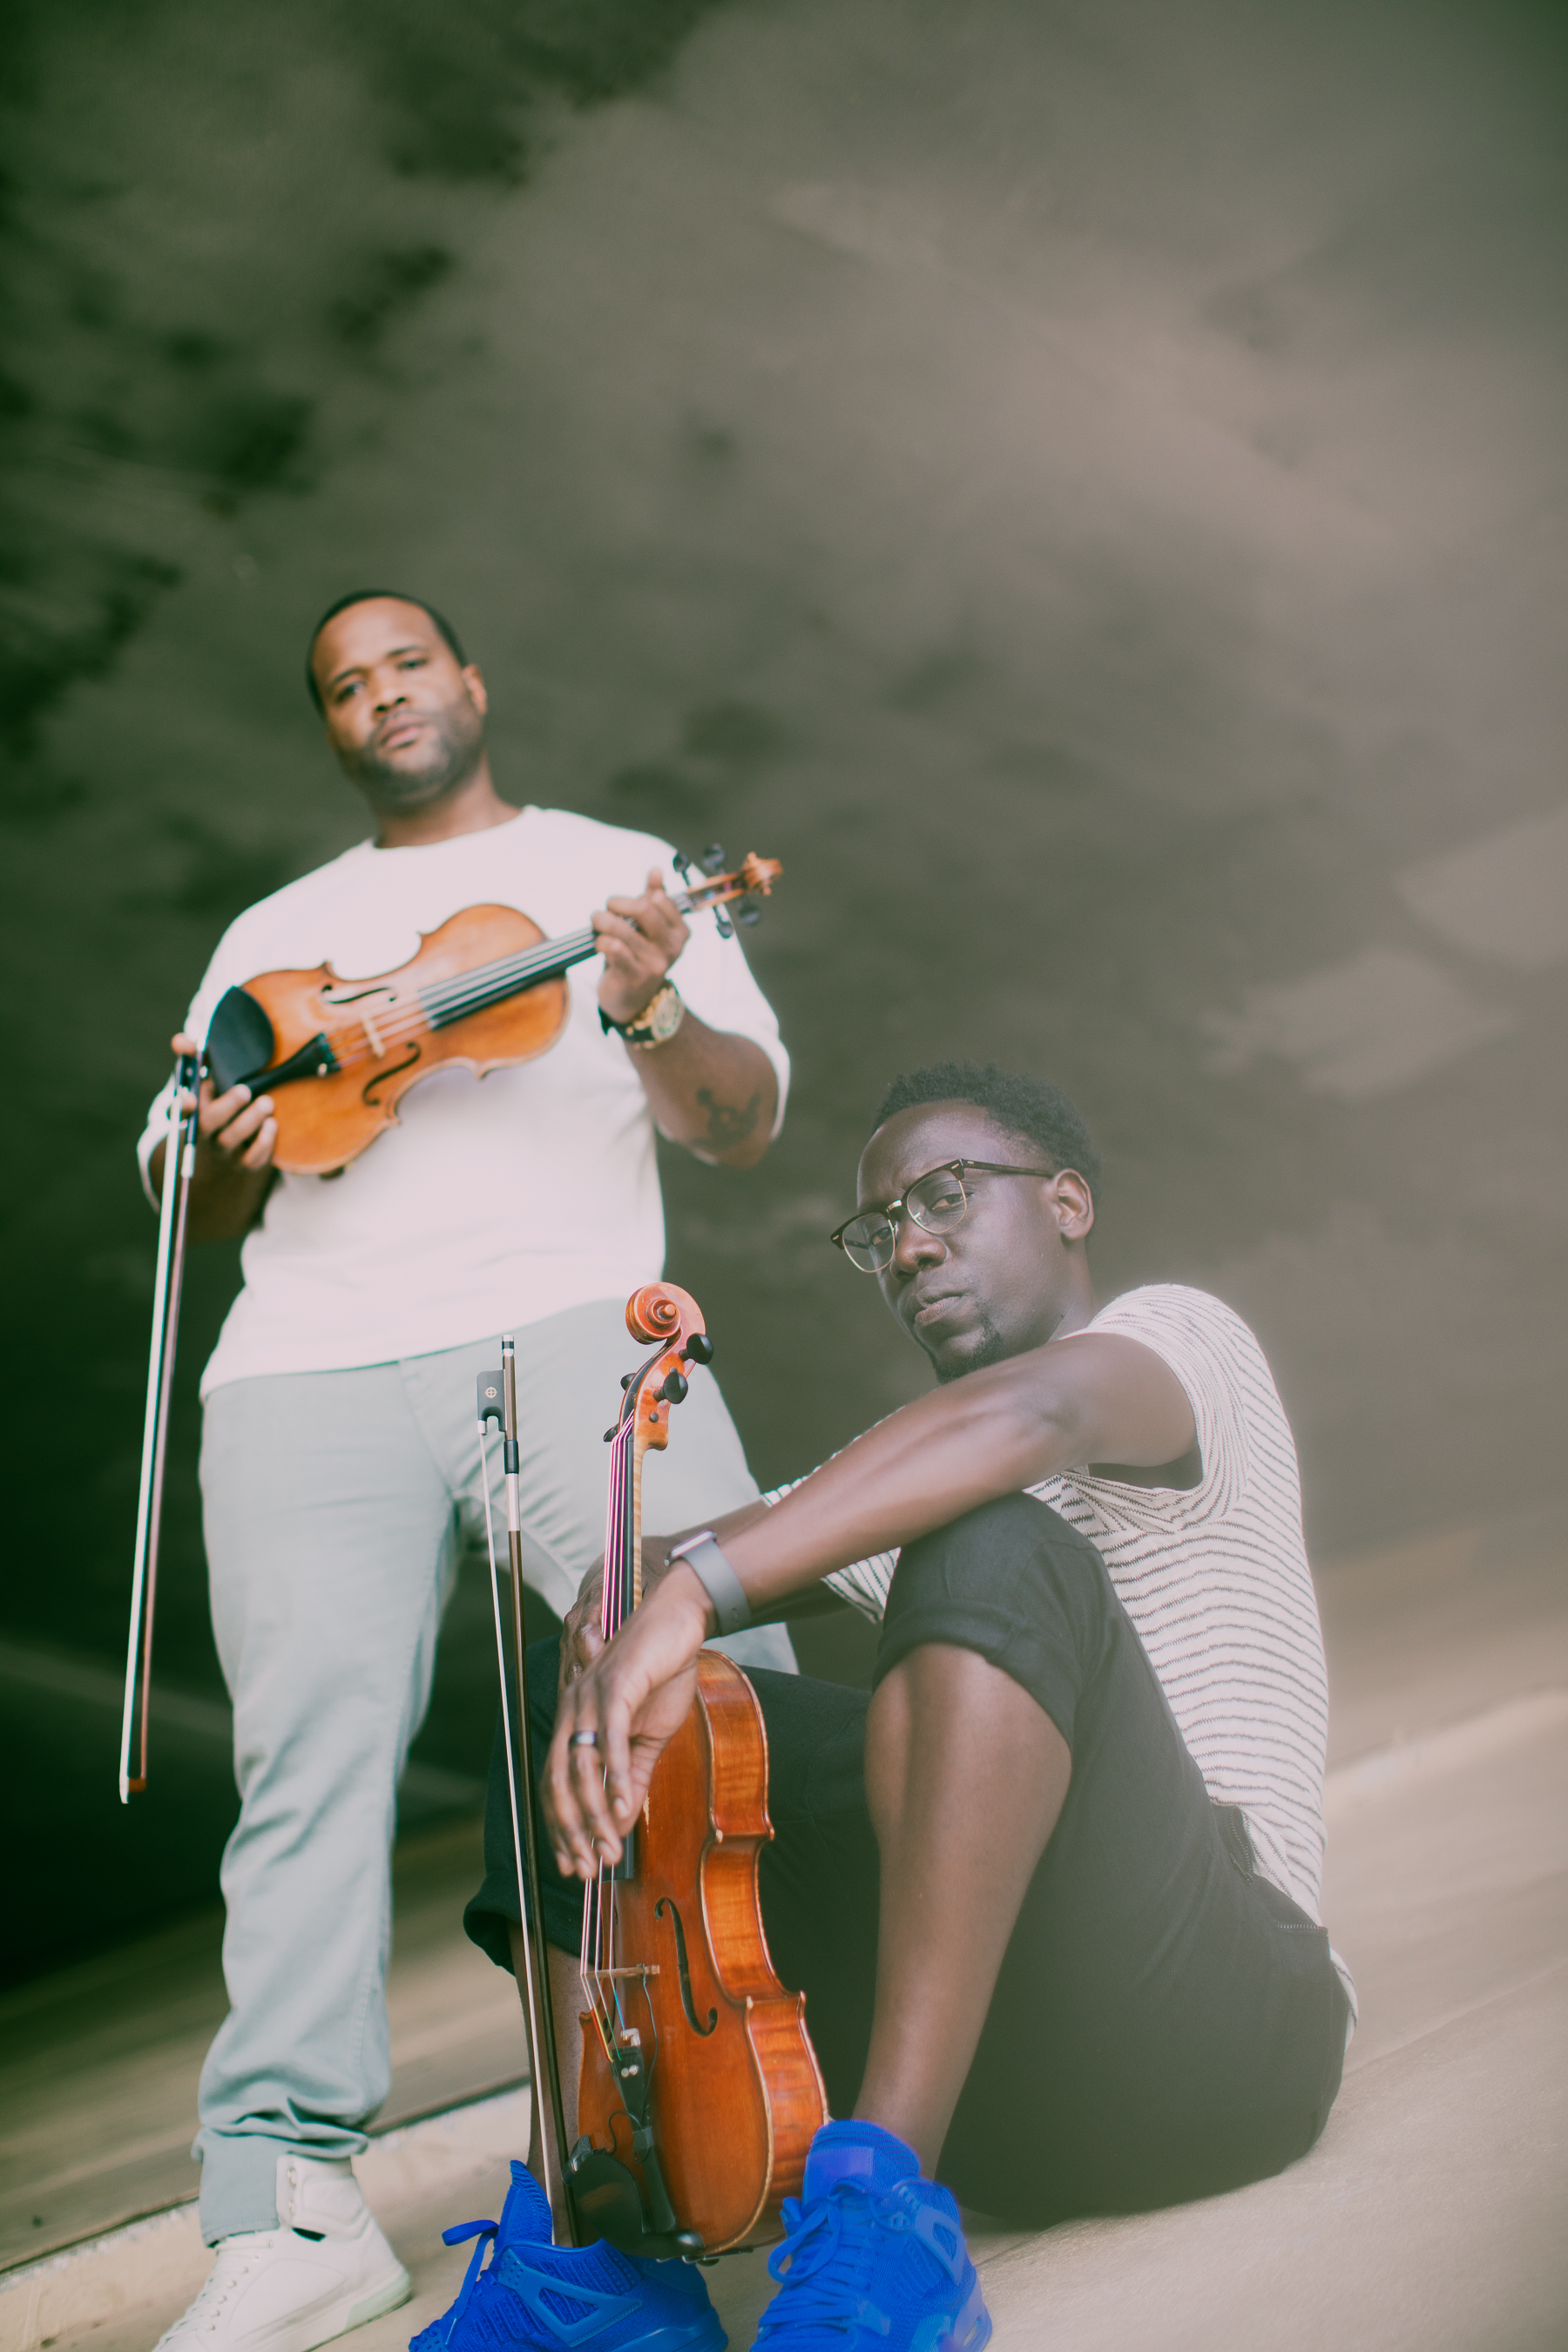 Wil Baptisite and Kev Marcus of Black Violin. Photo credit - Mark Clennon